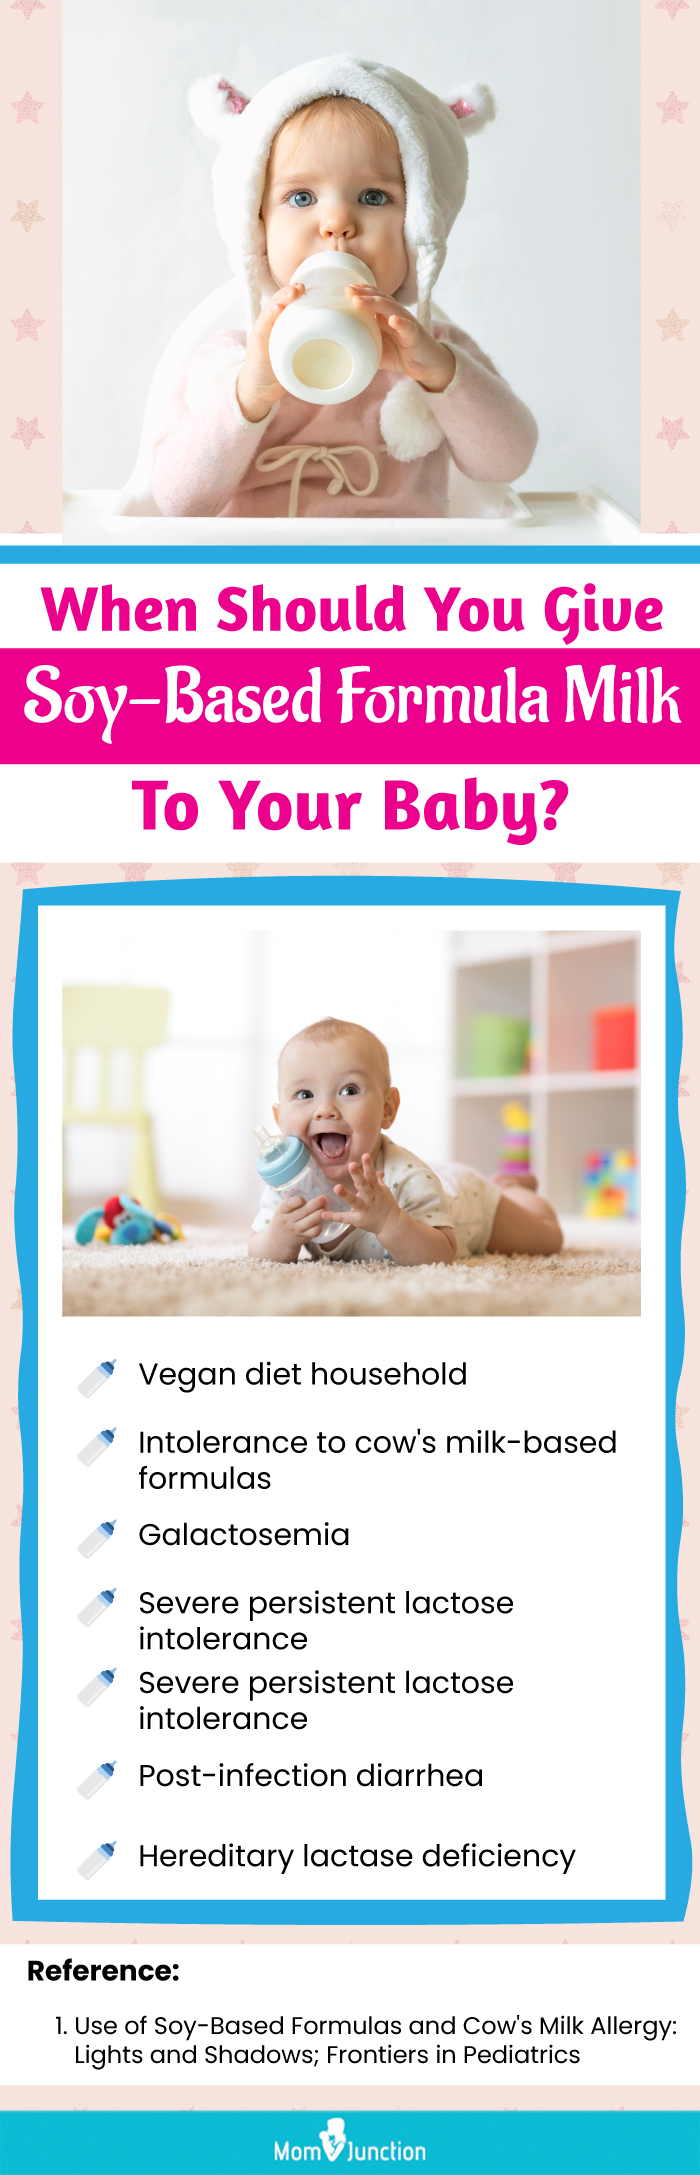 When Should You Give Soy Based Formula Milk To Your Baby (infographic)